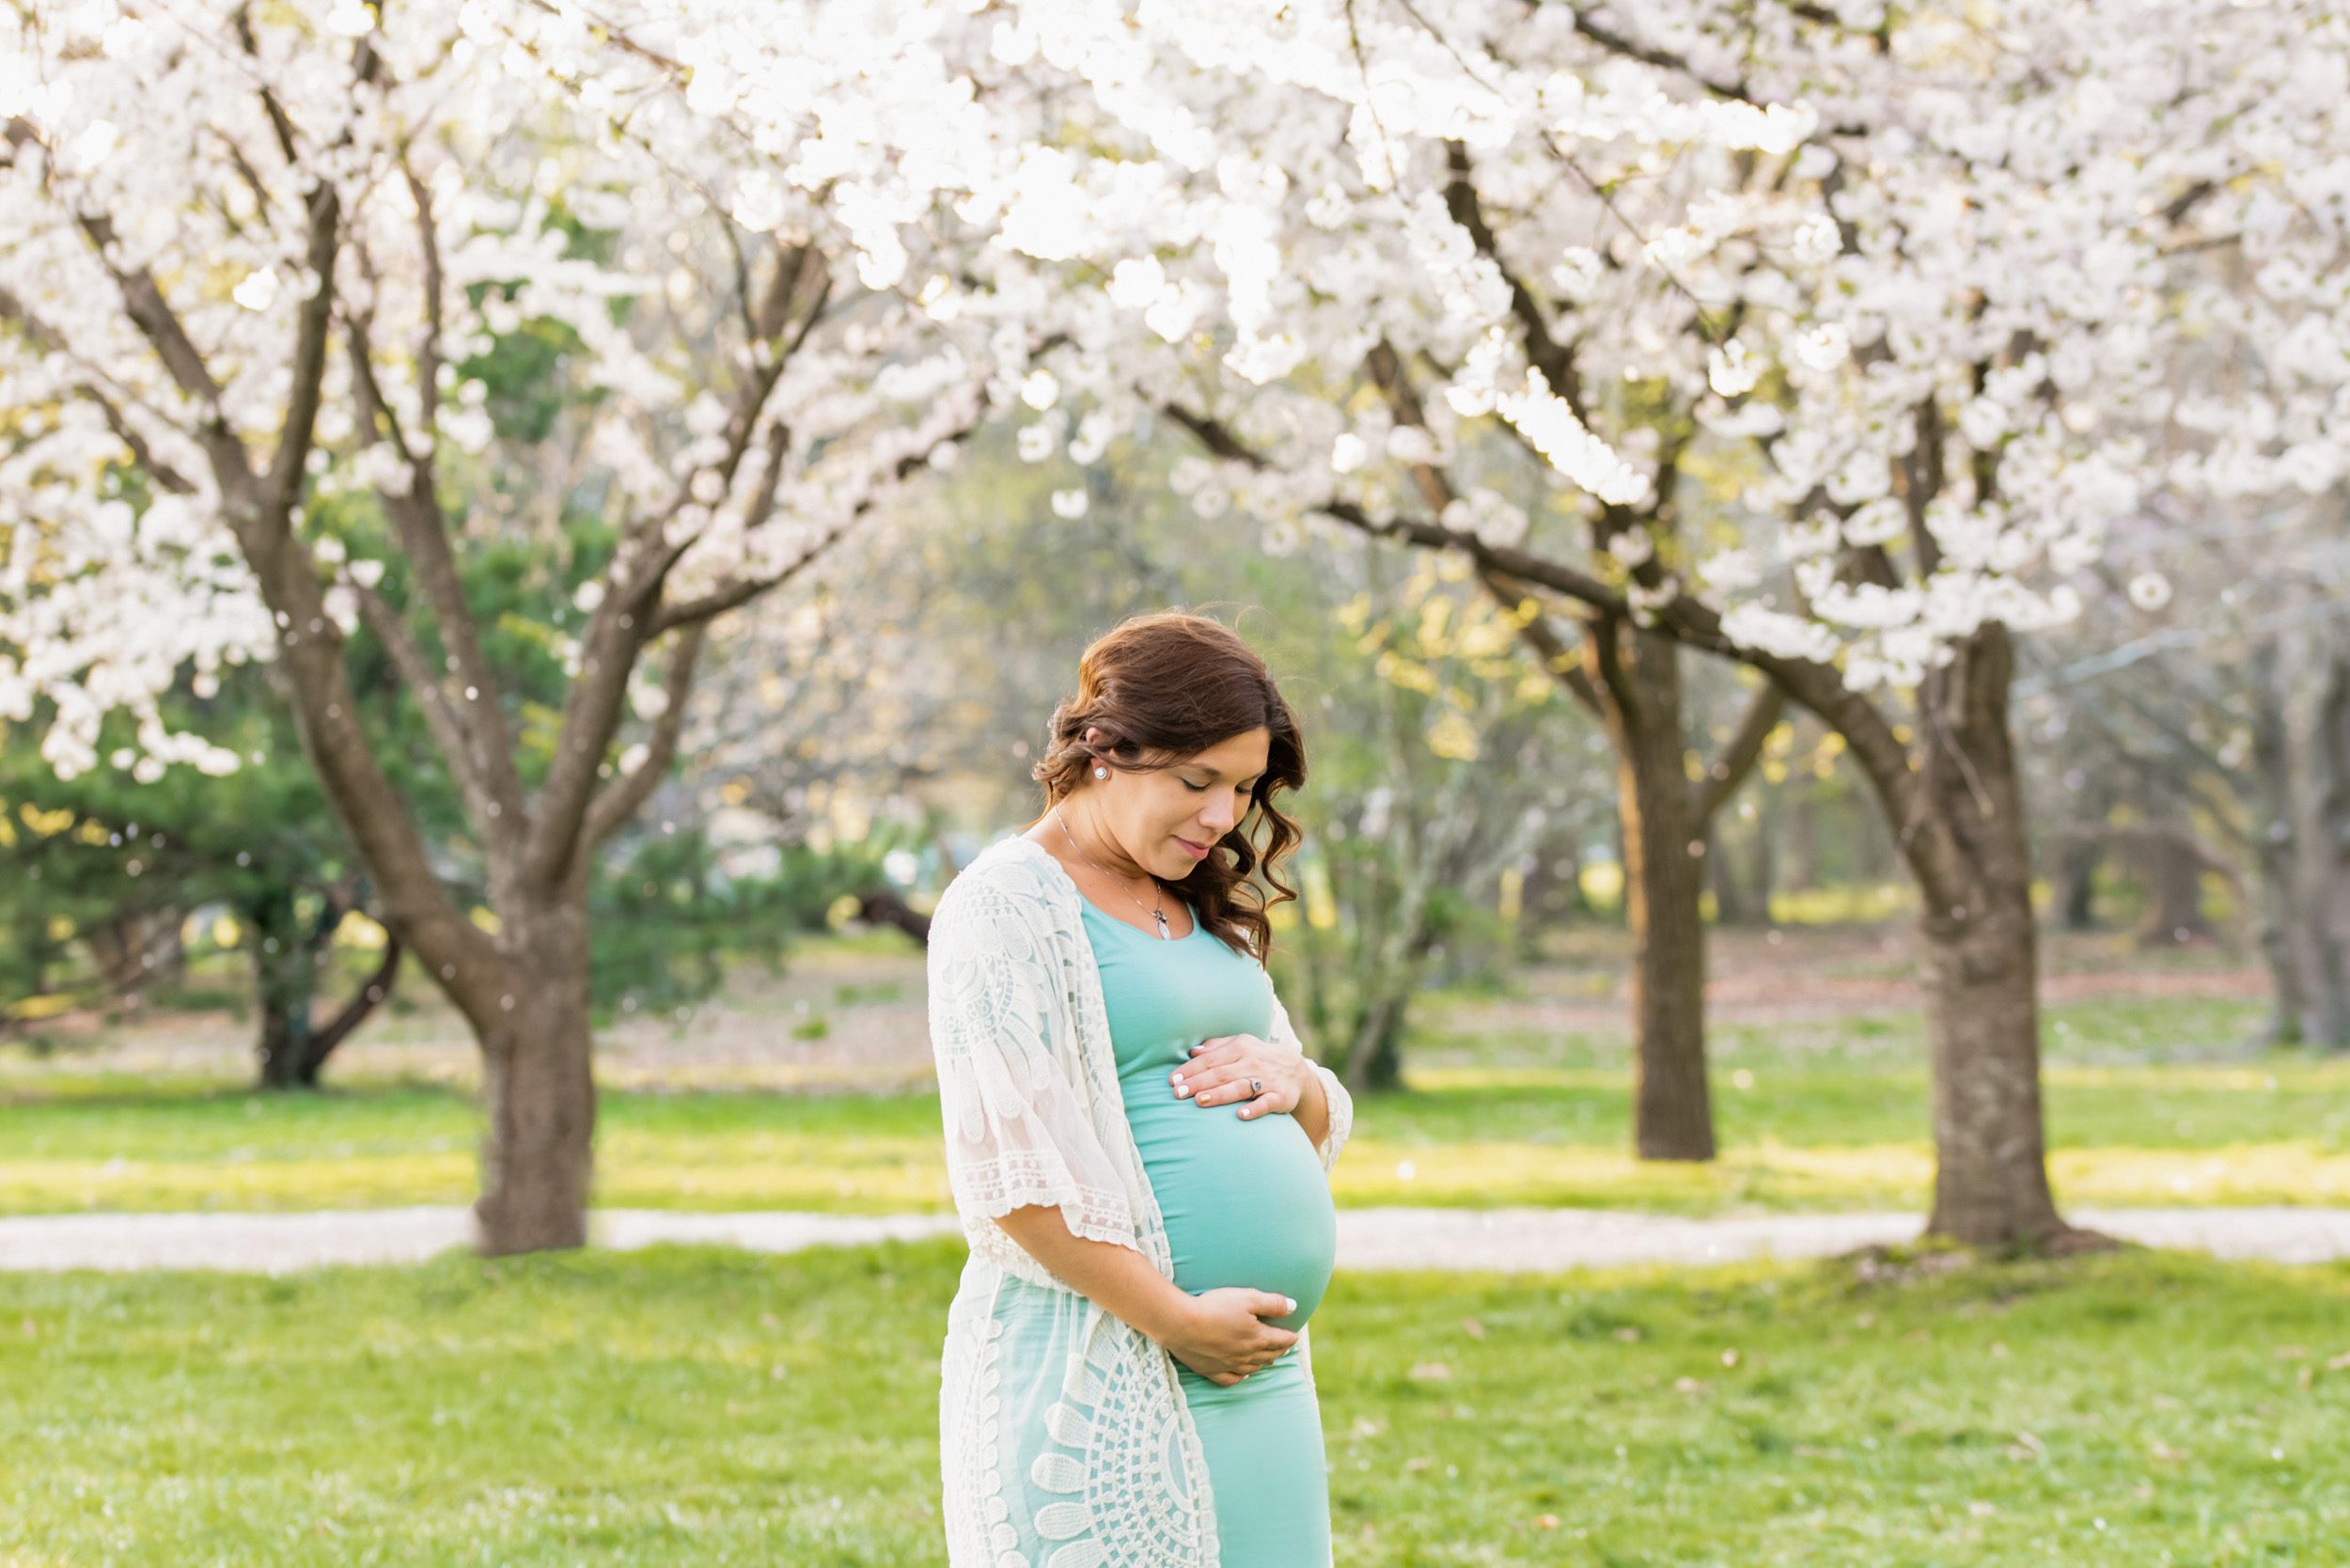 Expecting mother in an blue dress and white lace cardigan smiling down at her belly with cherry blossom trees in full bloom in the background at a maternity photoshoot